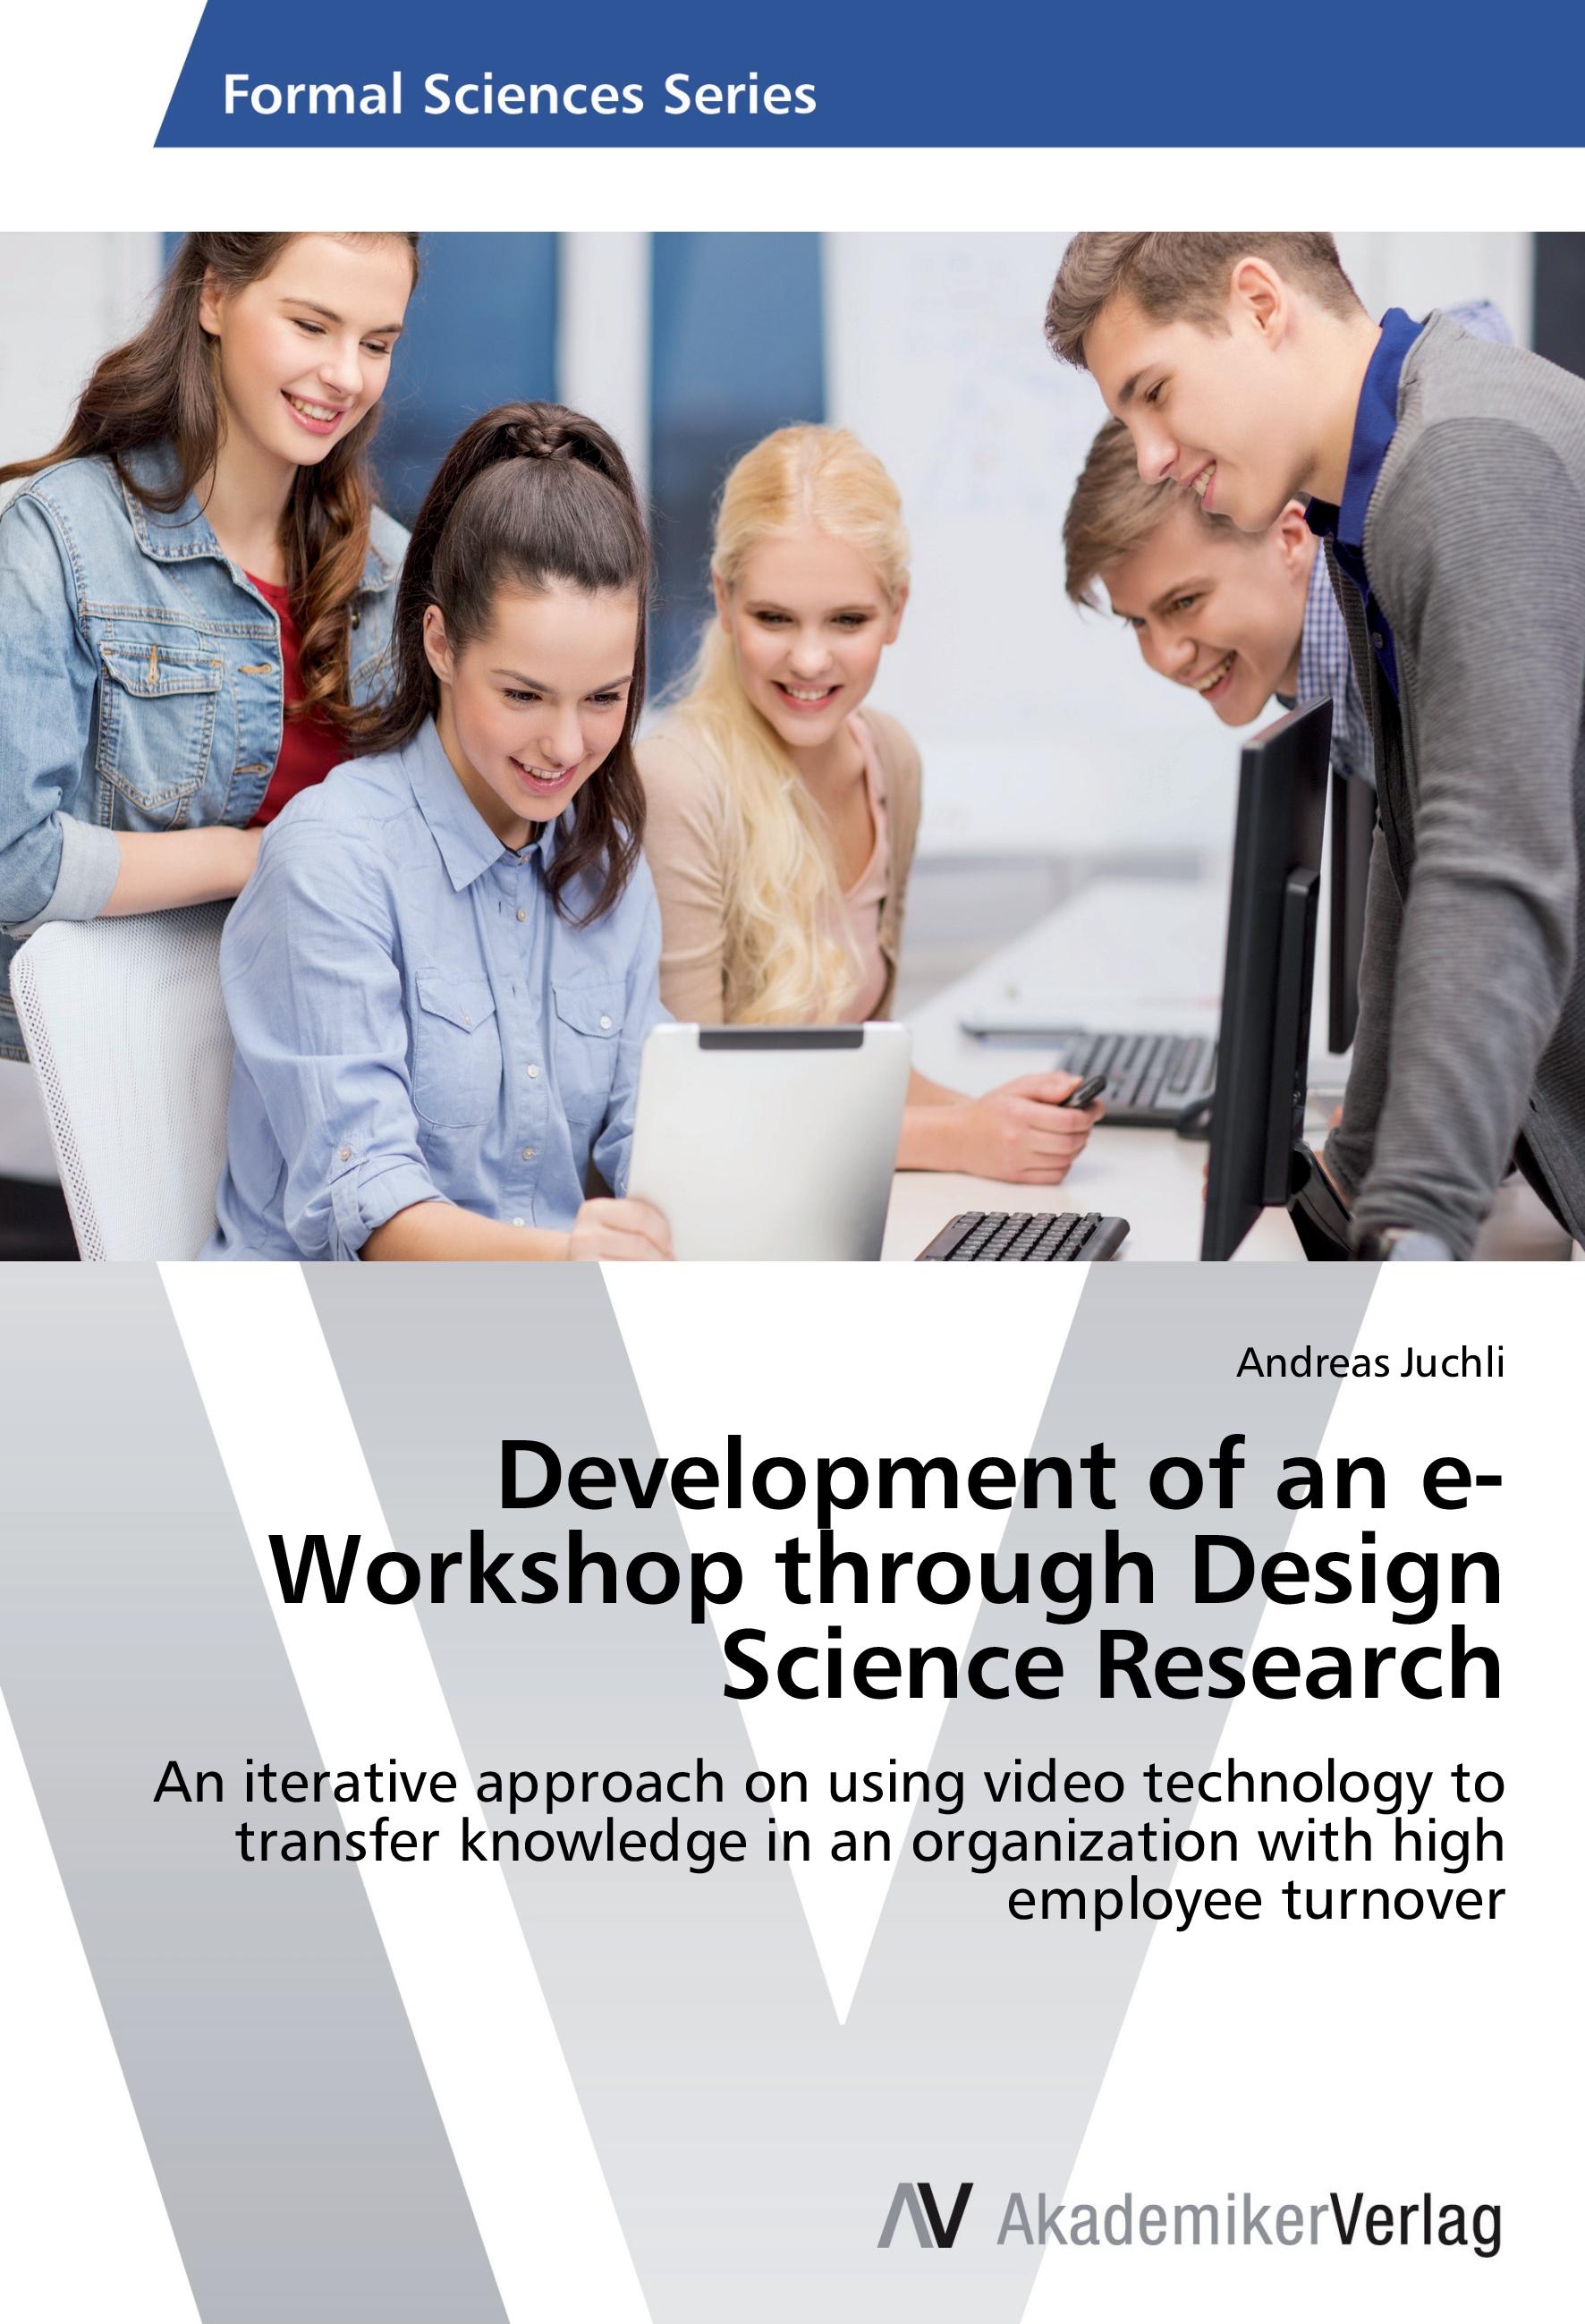 Development of an e-Workshop through Design Science Research - Andreas Juchli